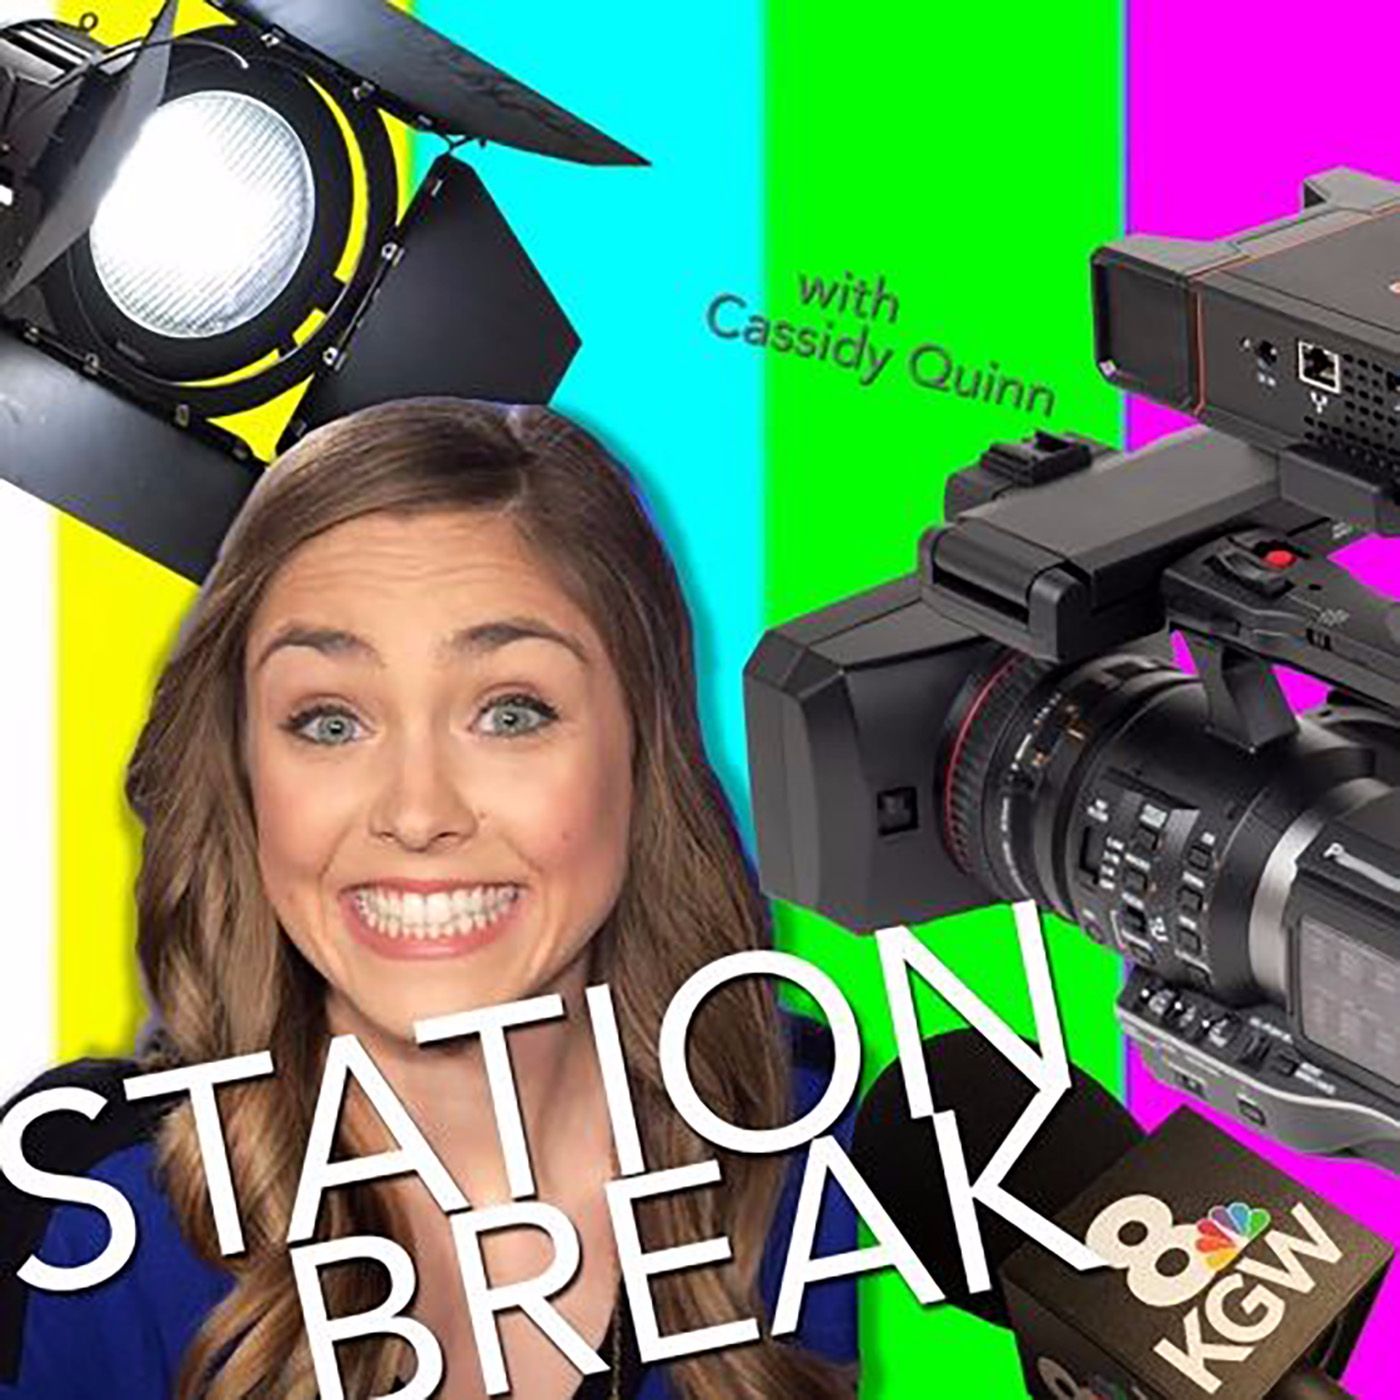 Station Break with Cassidy Quinn